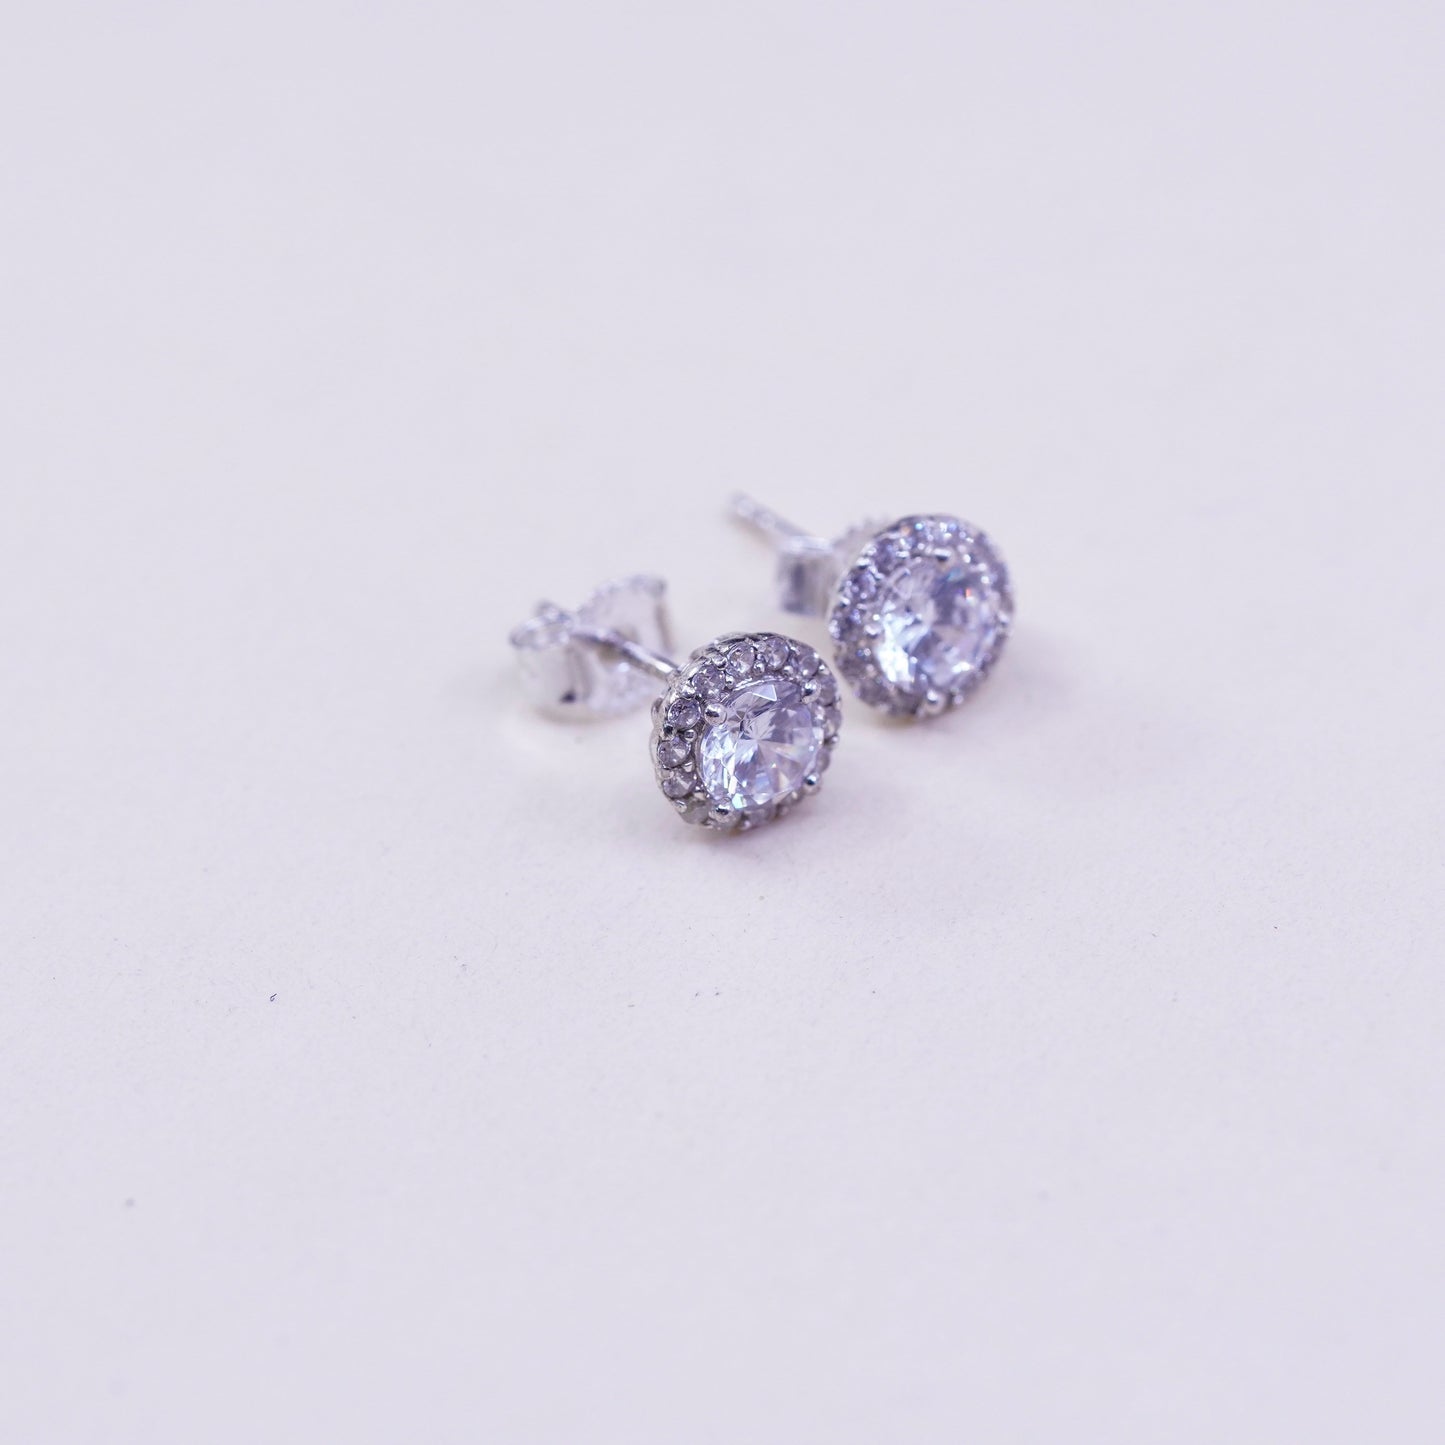 Vintage sterling silver earrings, 925 studs with cluster round cz